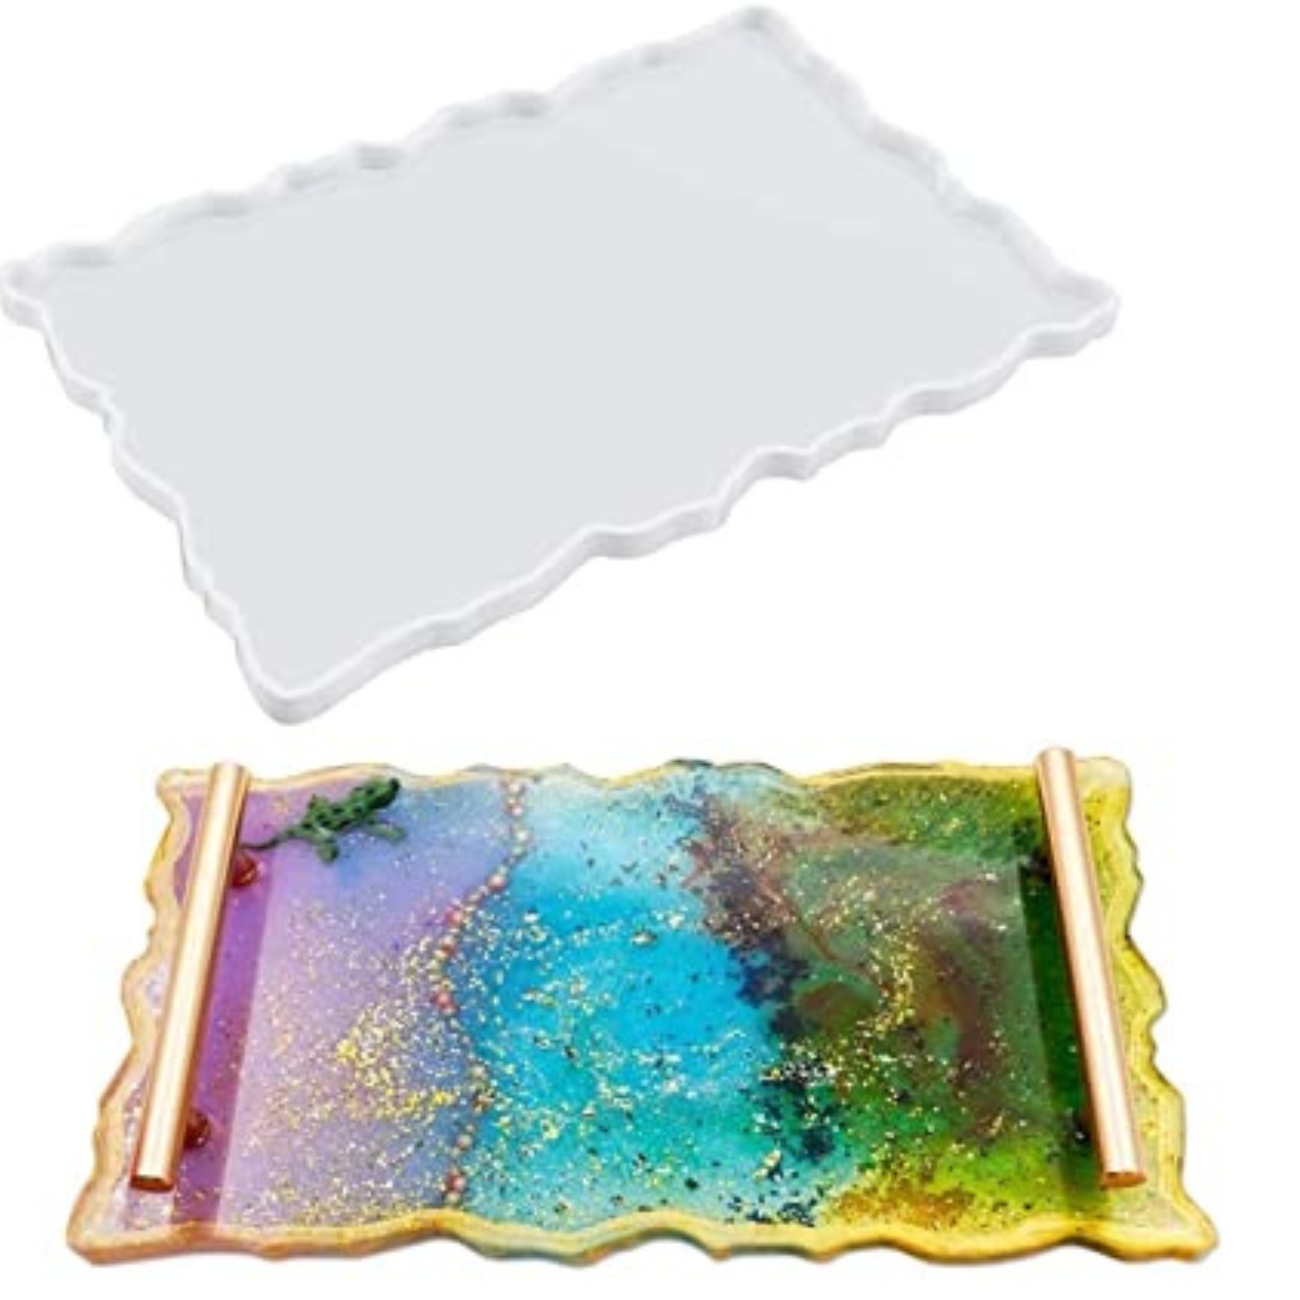 sodee-rectangular-tray-resin-mould-16-quot-x12-quot